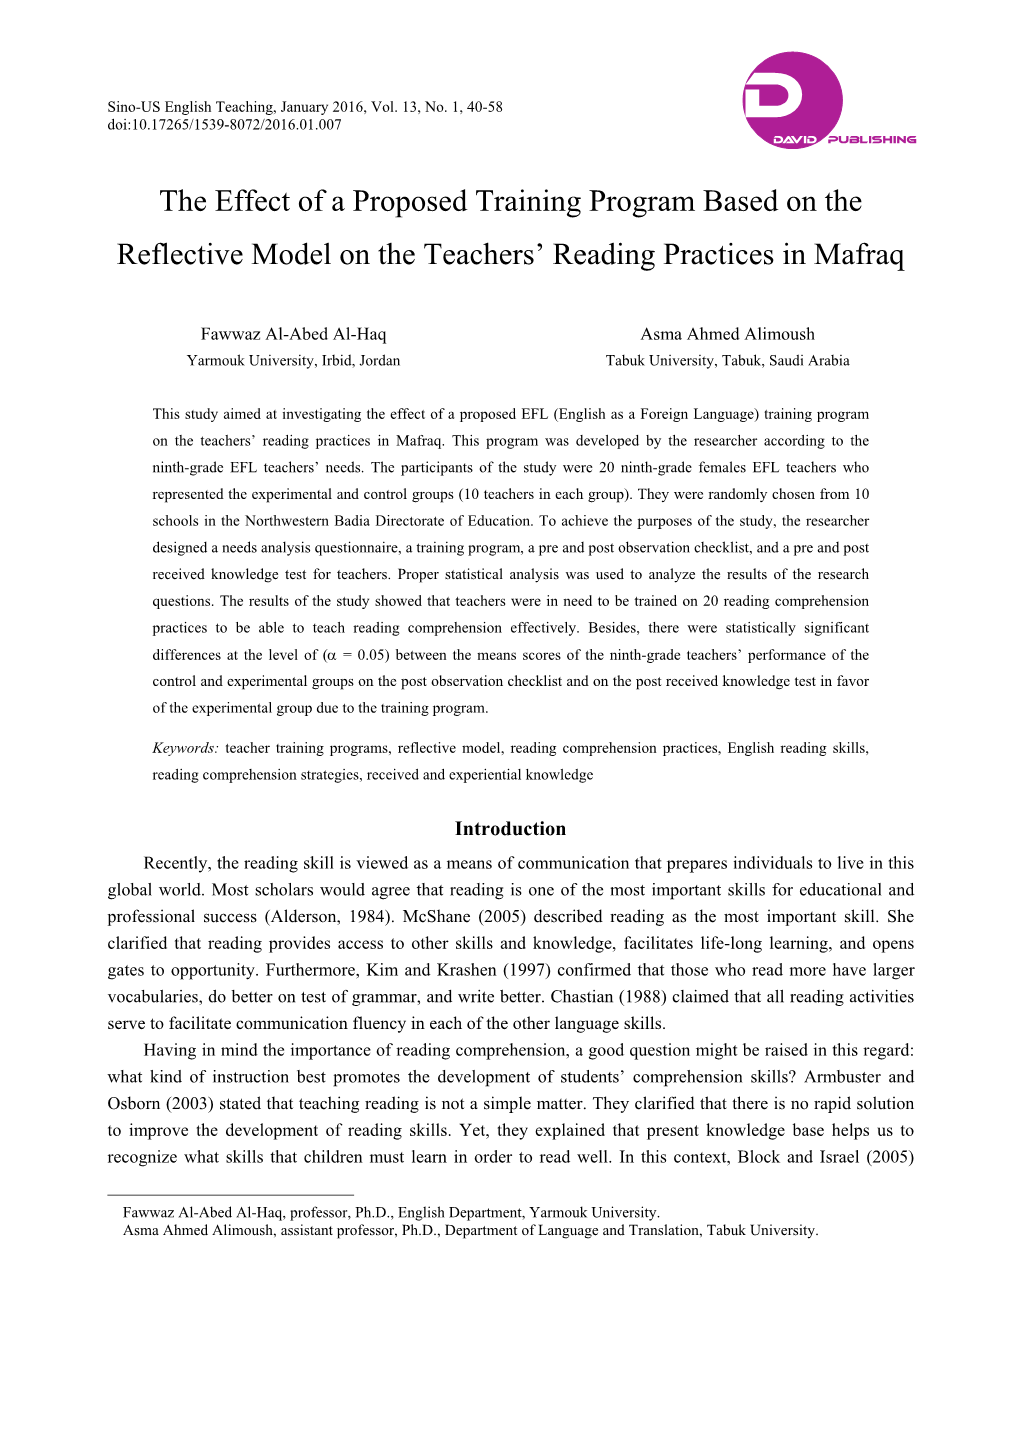 The Effect of a Proposed Training Program Based on the Reflective Model on the Teachers’ Reading Practices in Mafraq